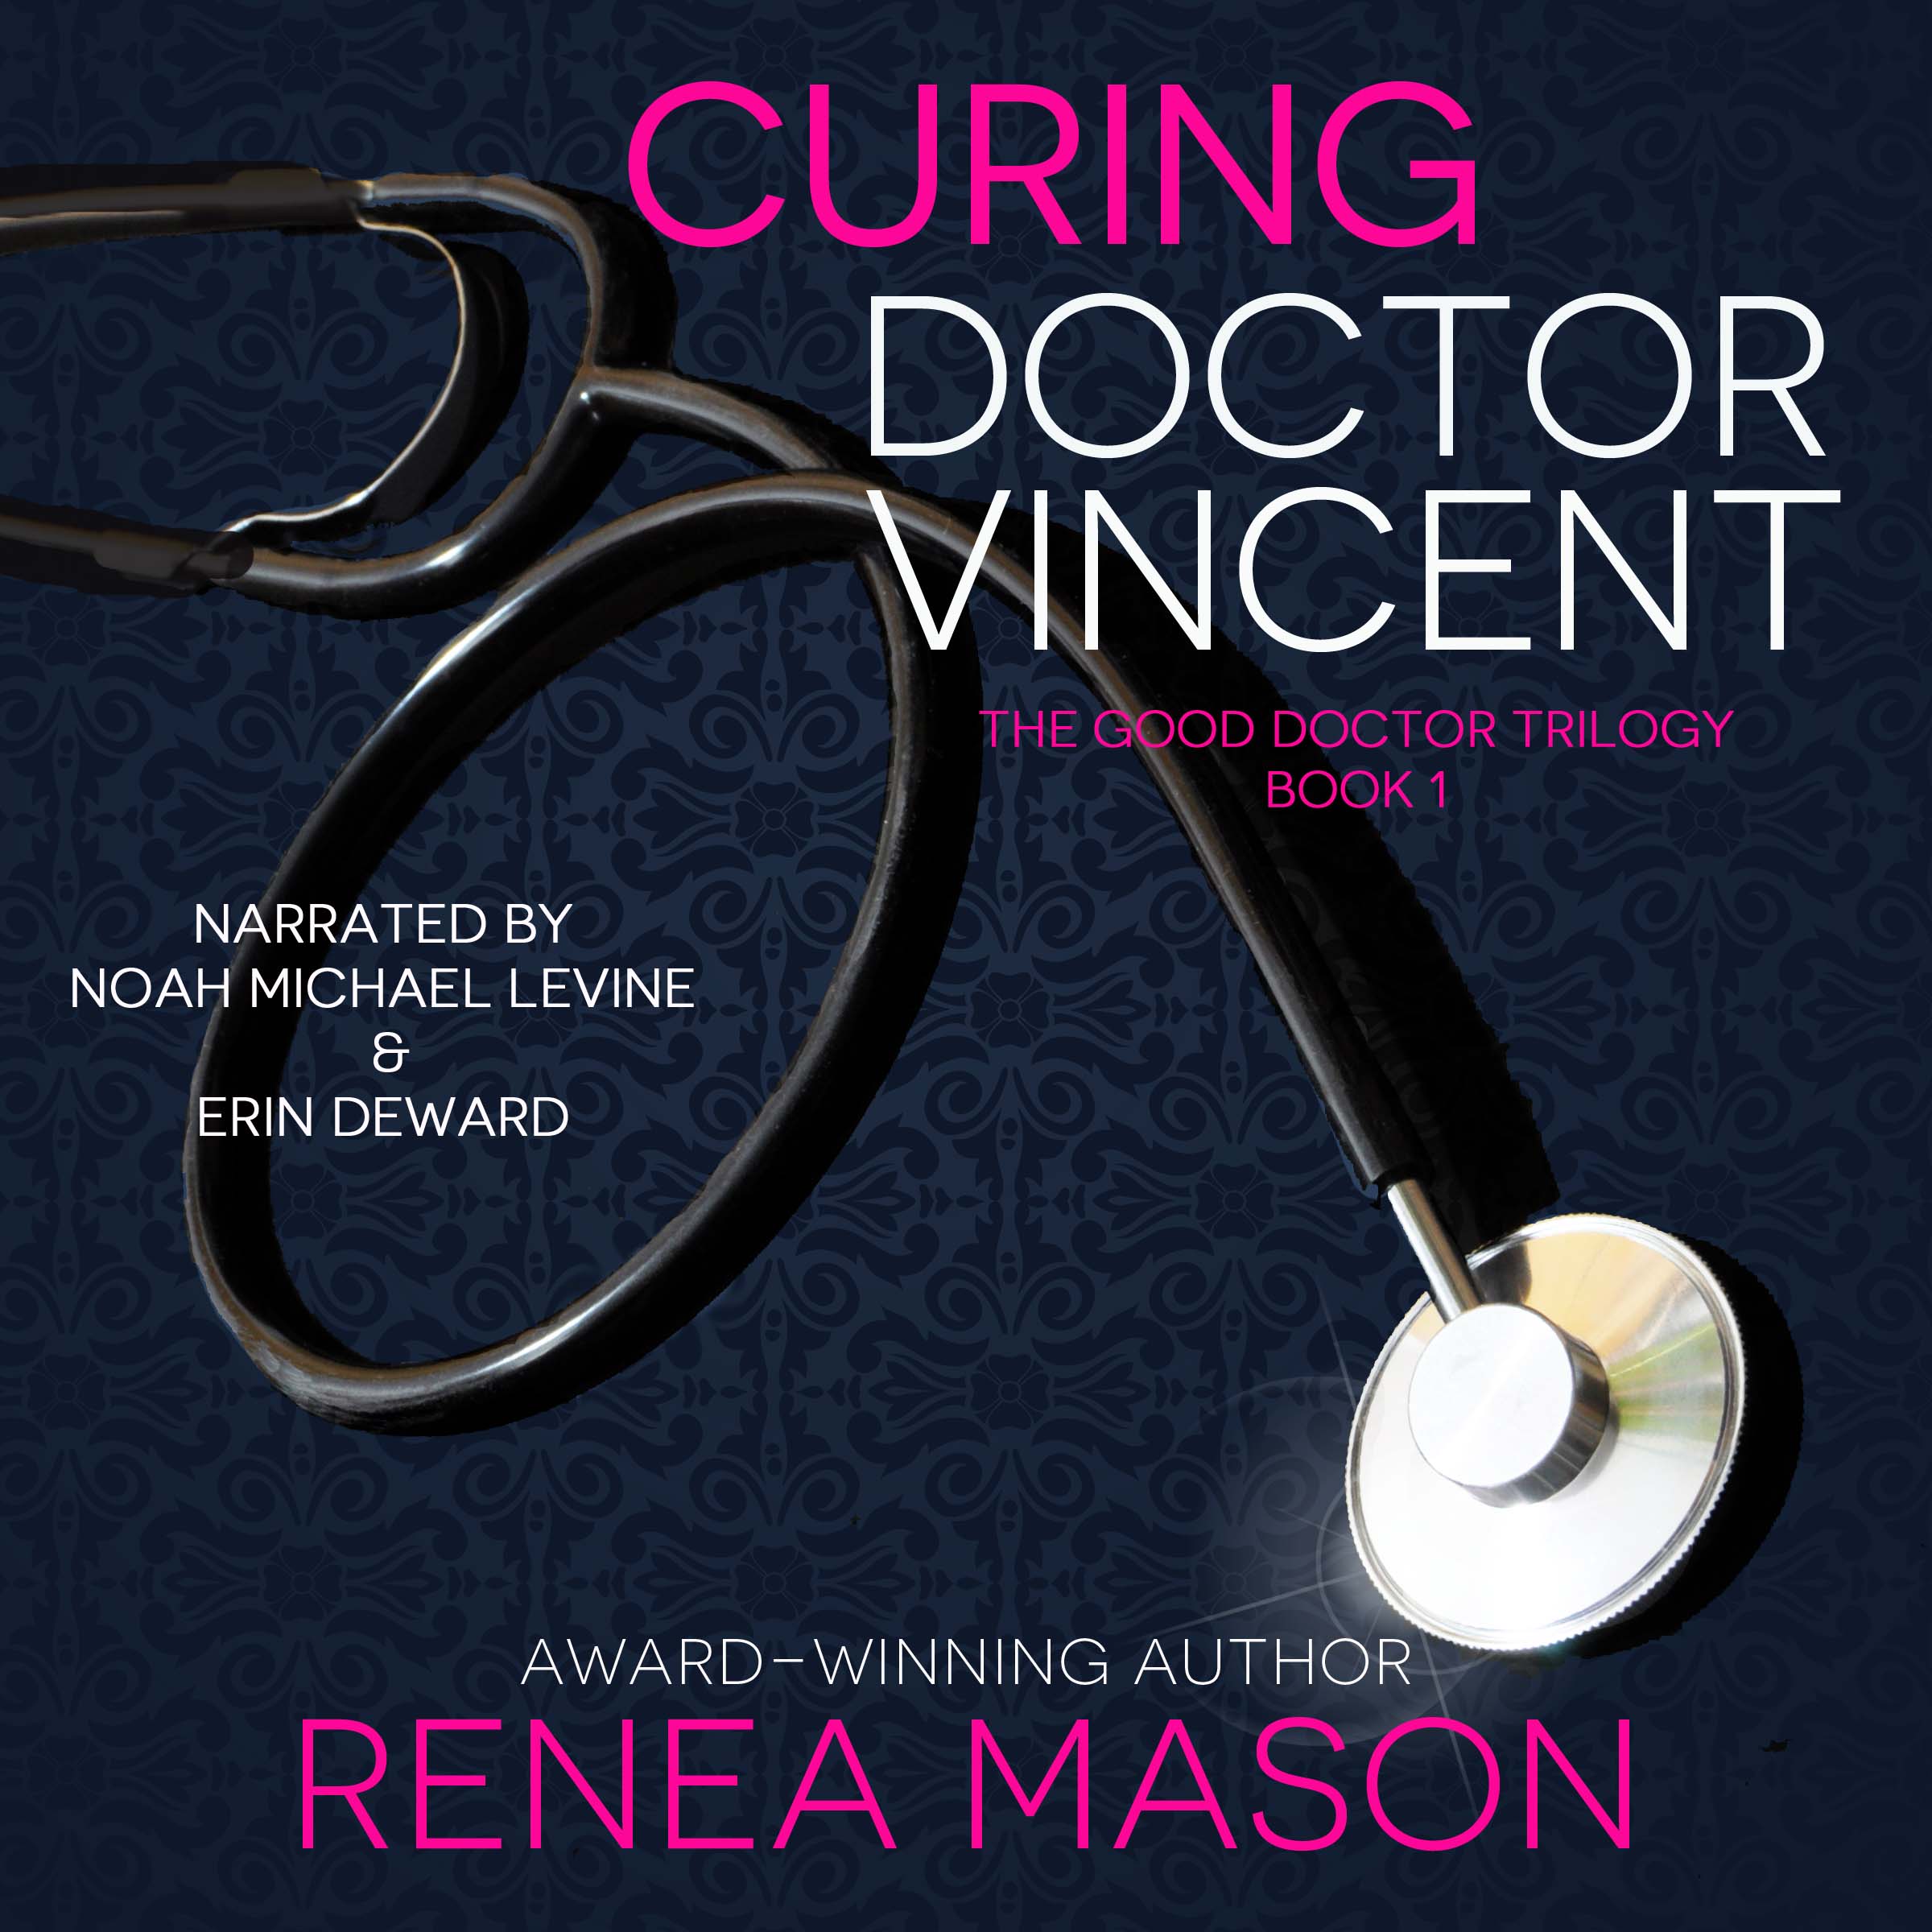 Curing Doctor Vincent by Renea Mason - read by Noah Michael Levine and Erin deWard